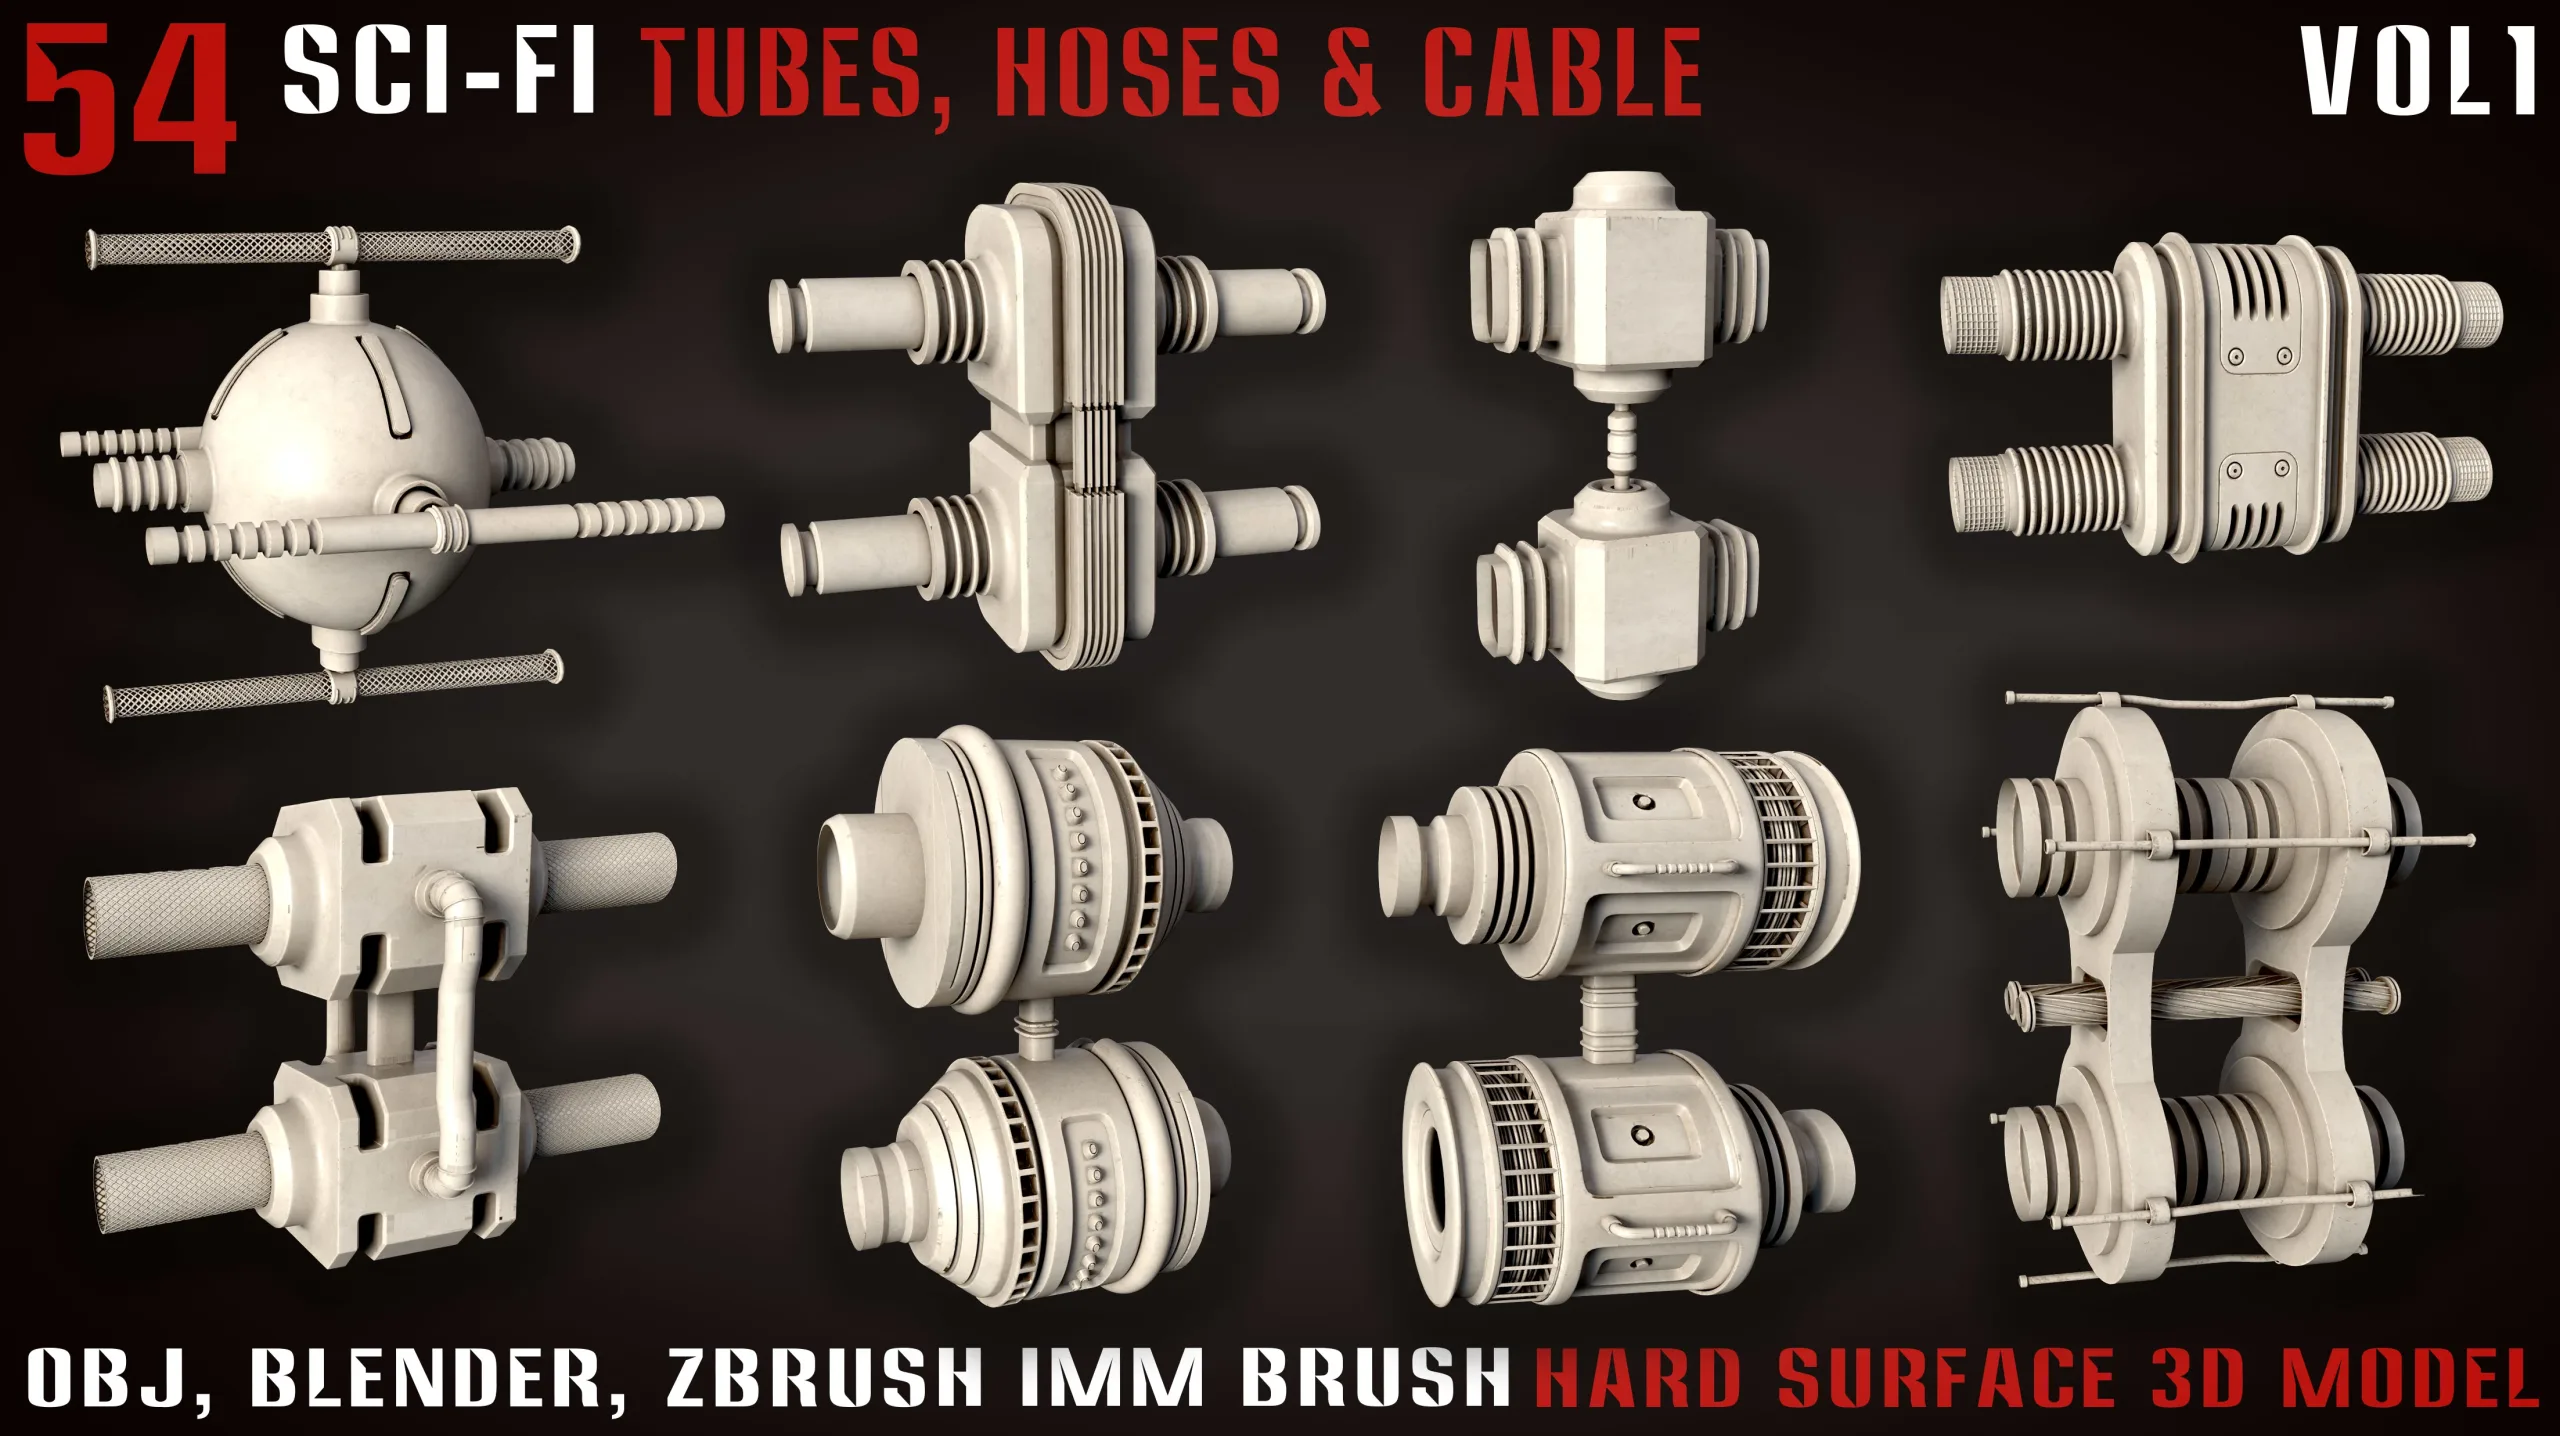 54 Sci-Fi Tubes, Hoses and Cables - vol1